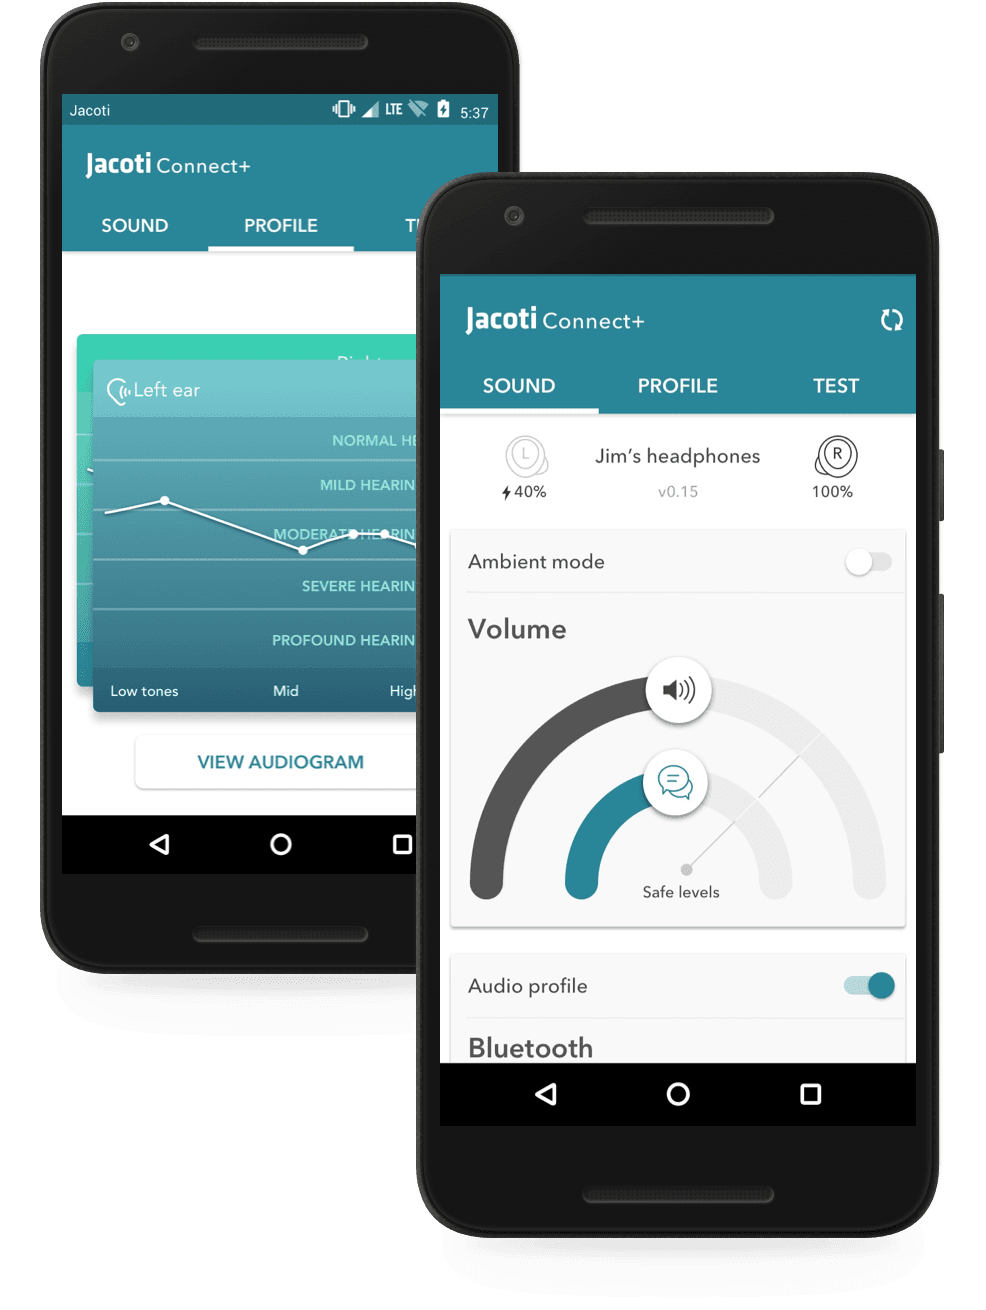 Jacoti Inside Android smartphone Control app mockup showing the sound control screen and hearing profile cards indicating degrees of hearing loss